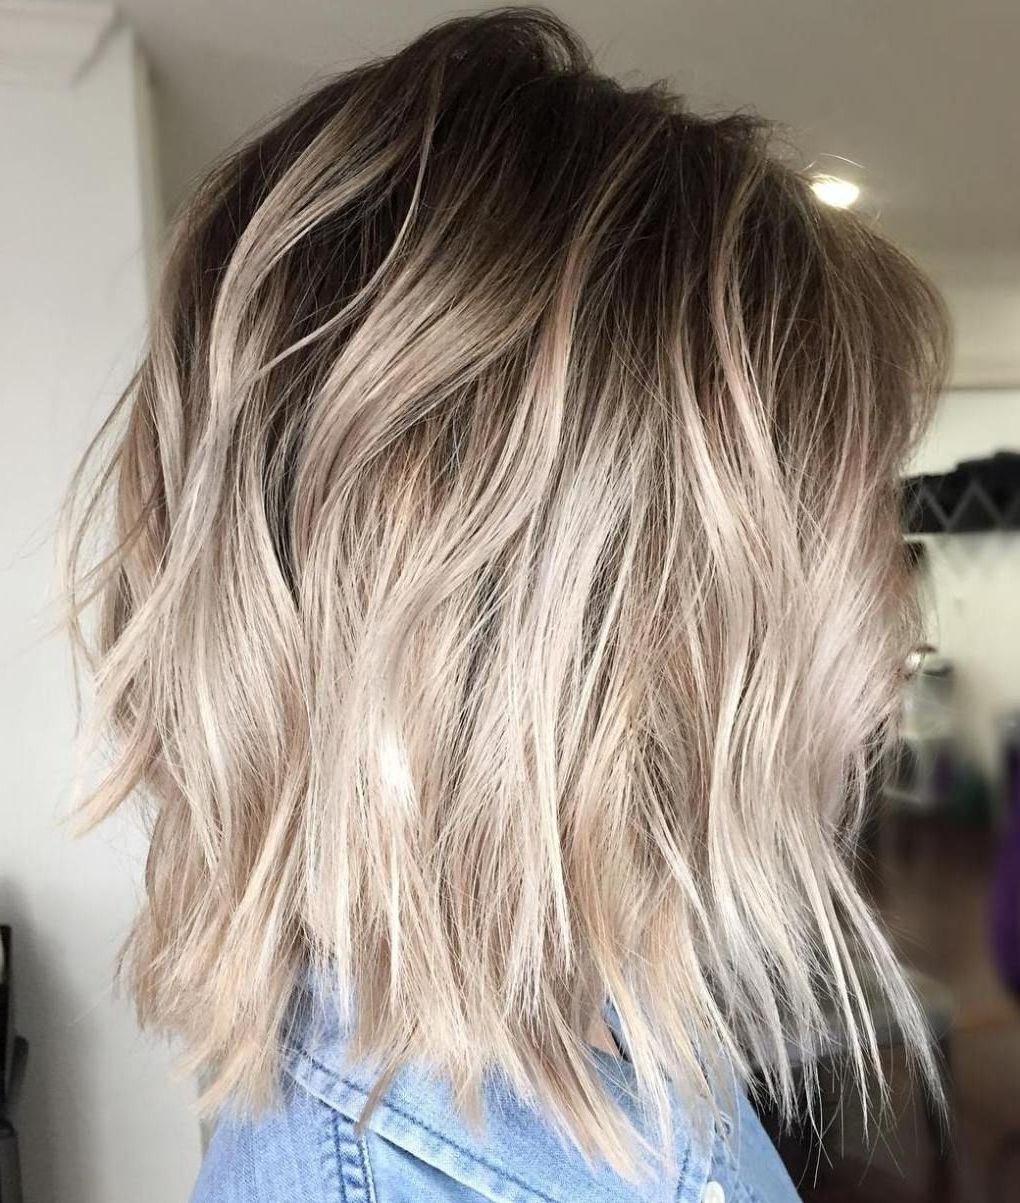 40 Beautiful Blonde Balayage Looks | Projects To Try | Pinterest Throughout Current Ashy Blonde Pixie Haircuts With A Messy Touch (View 15 of 15)